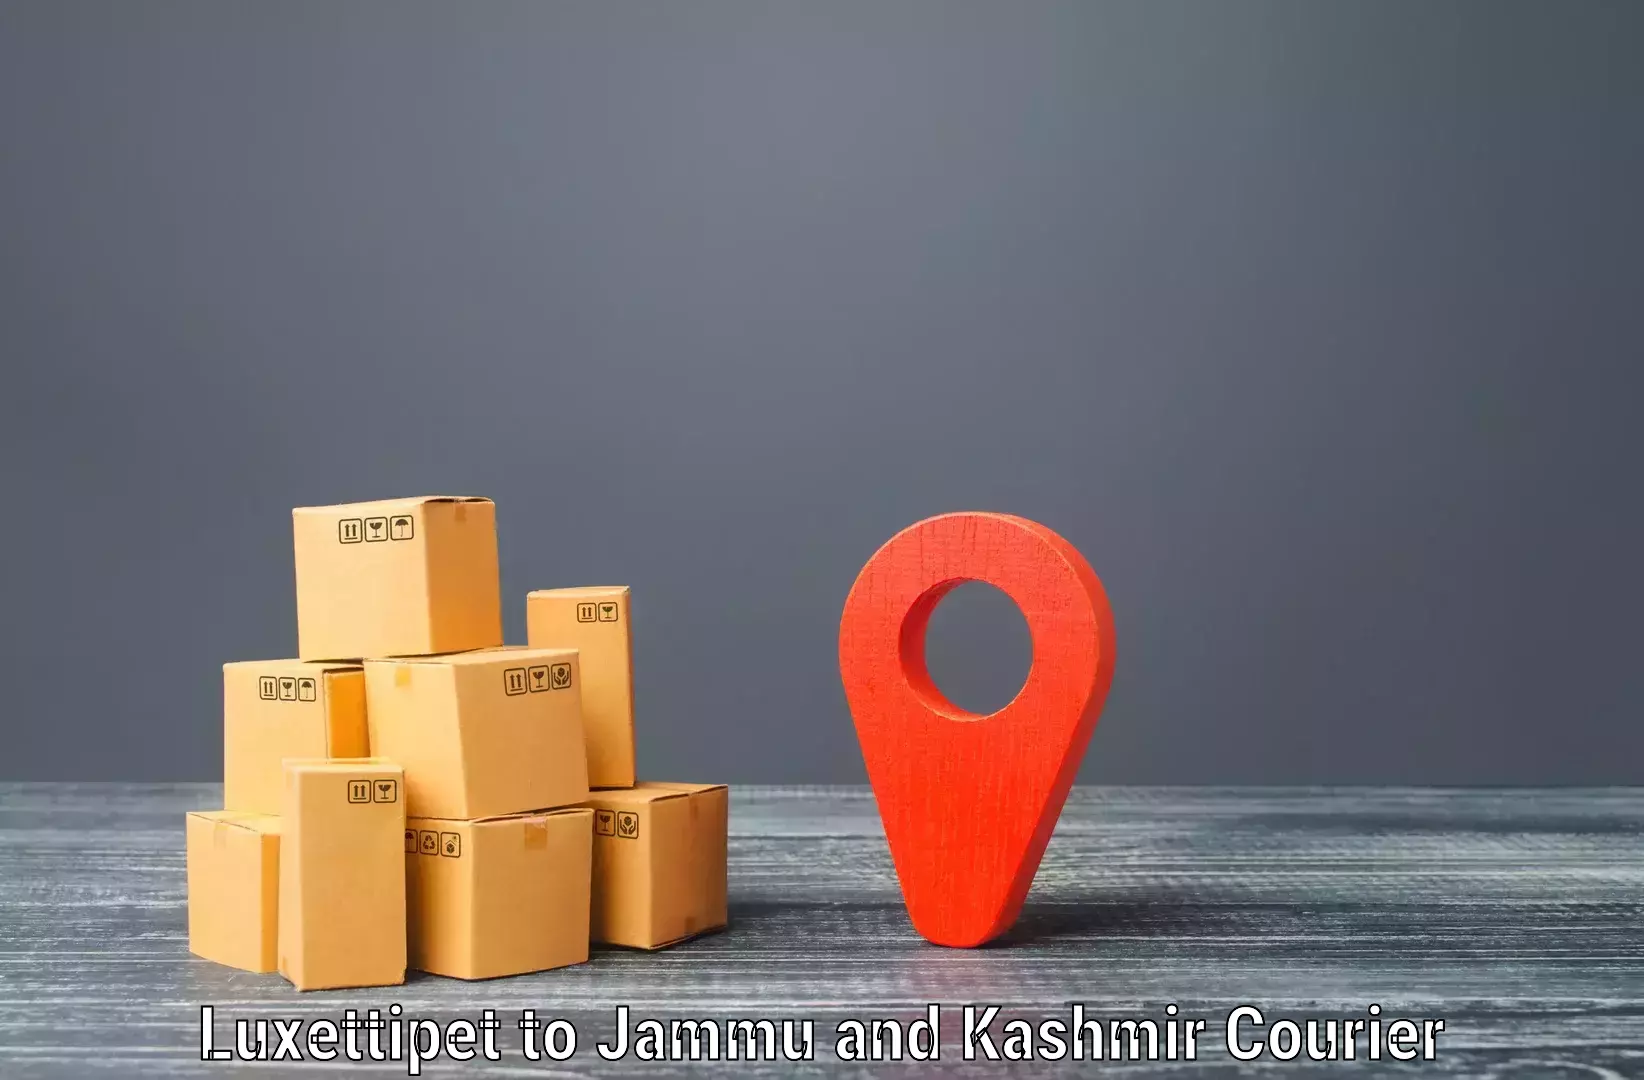 24/7 courier service Luxettipet to Kupwara